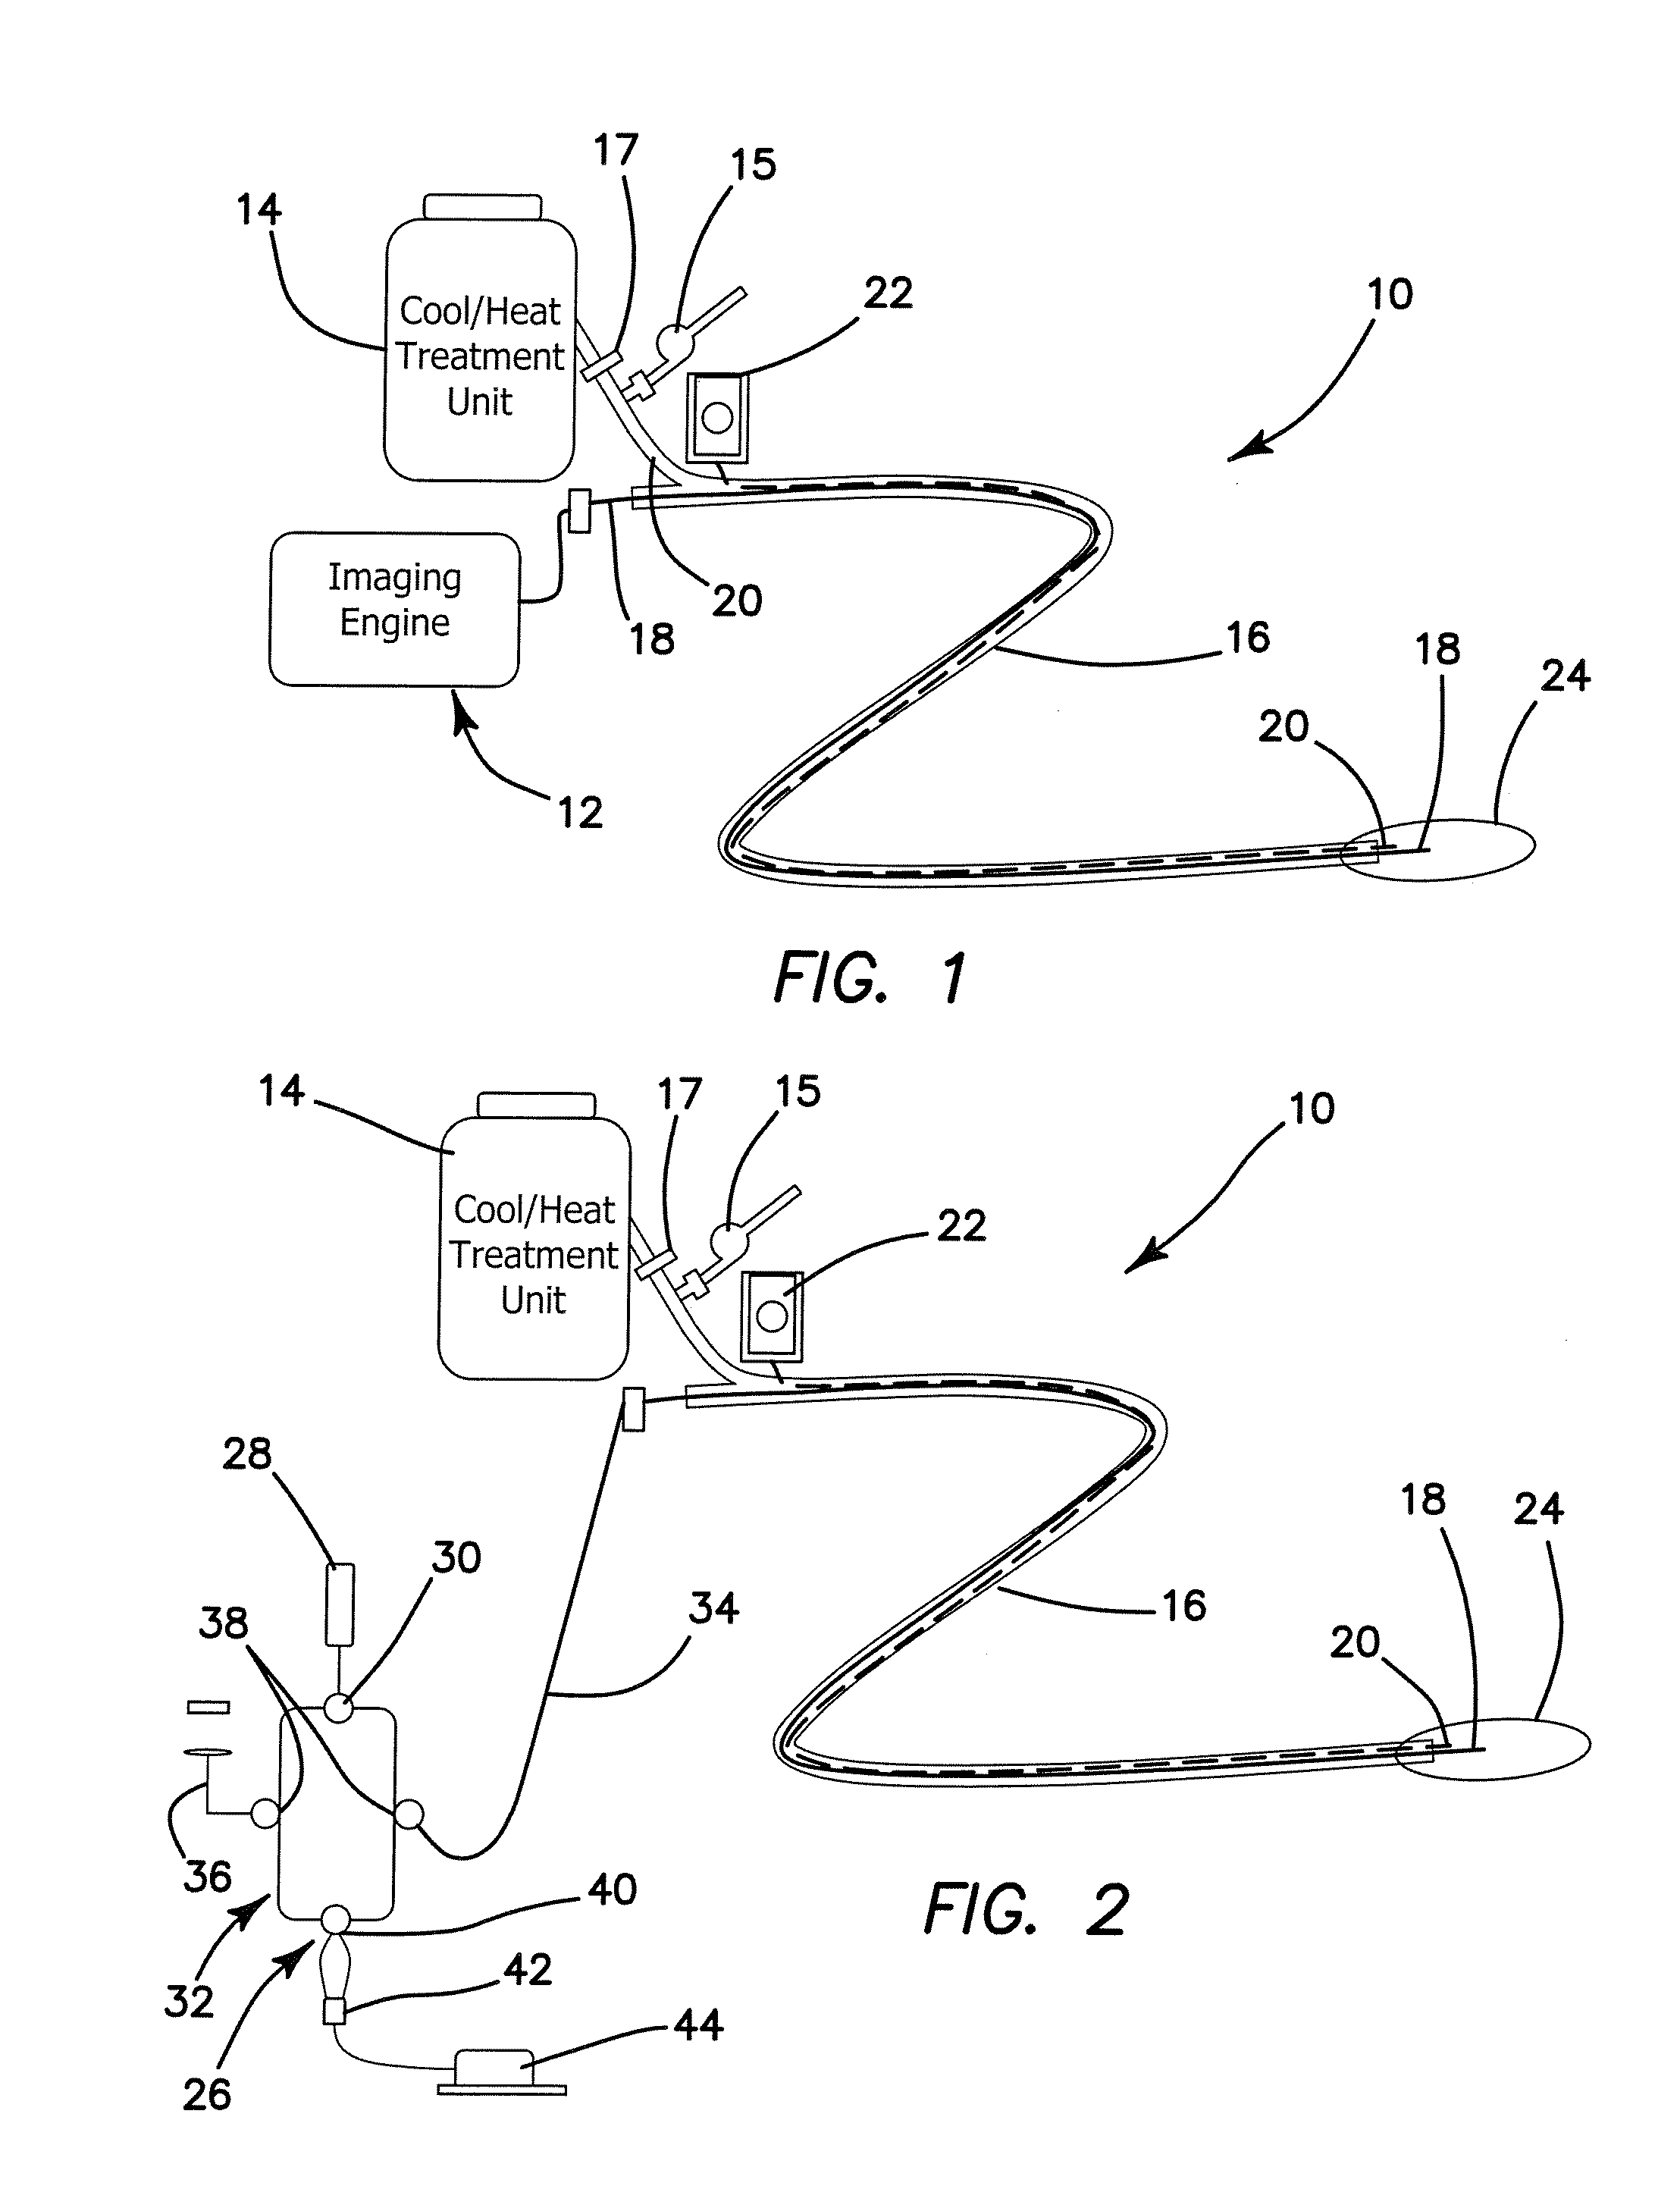 Integrated intraoperative diagnosis and thermal therapy system